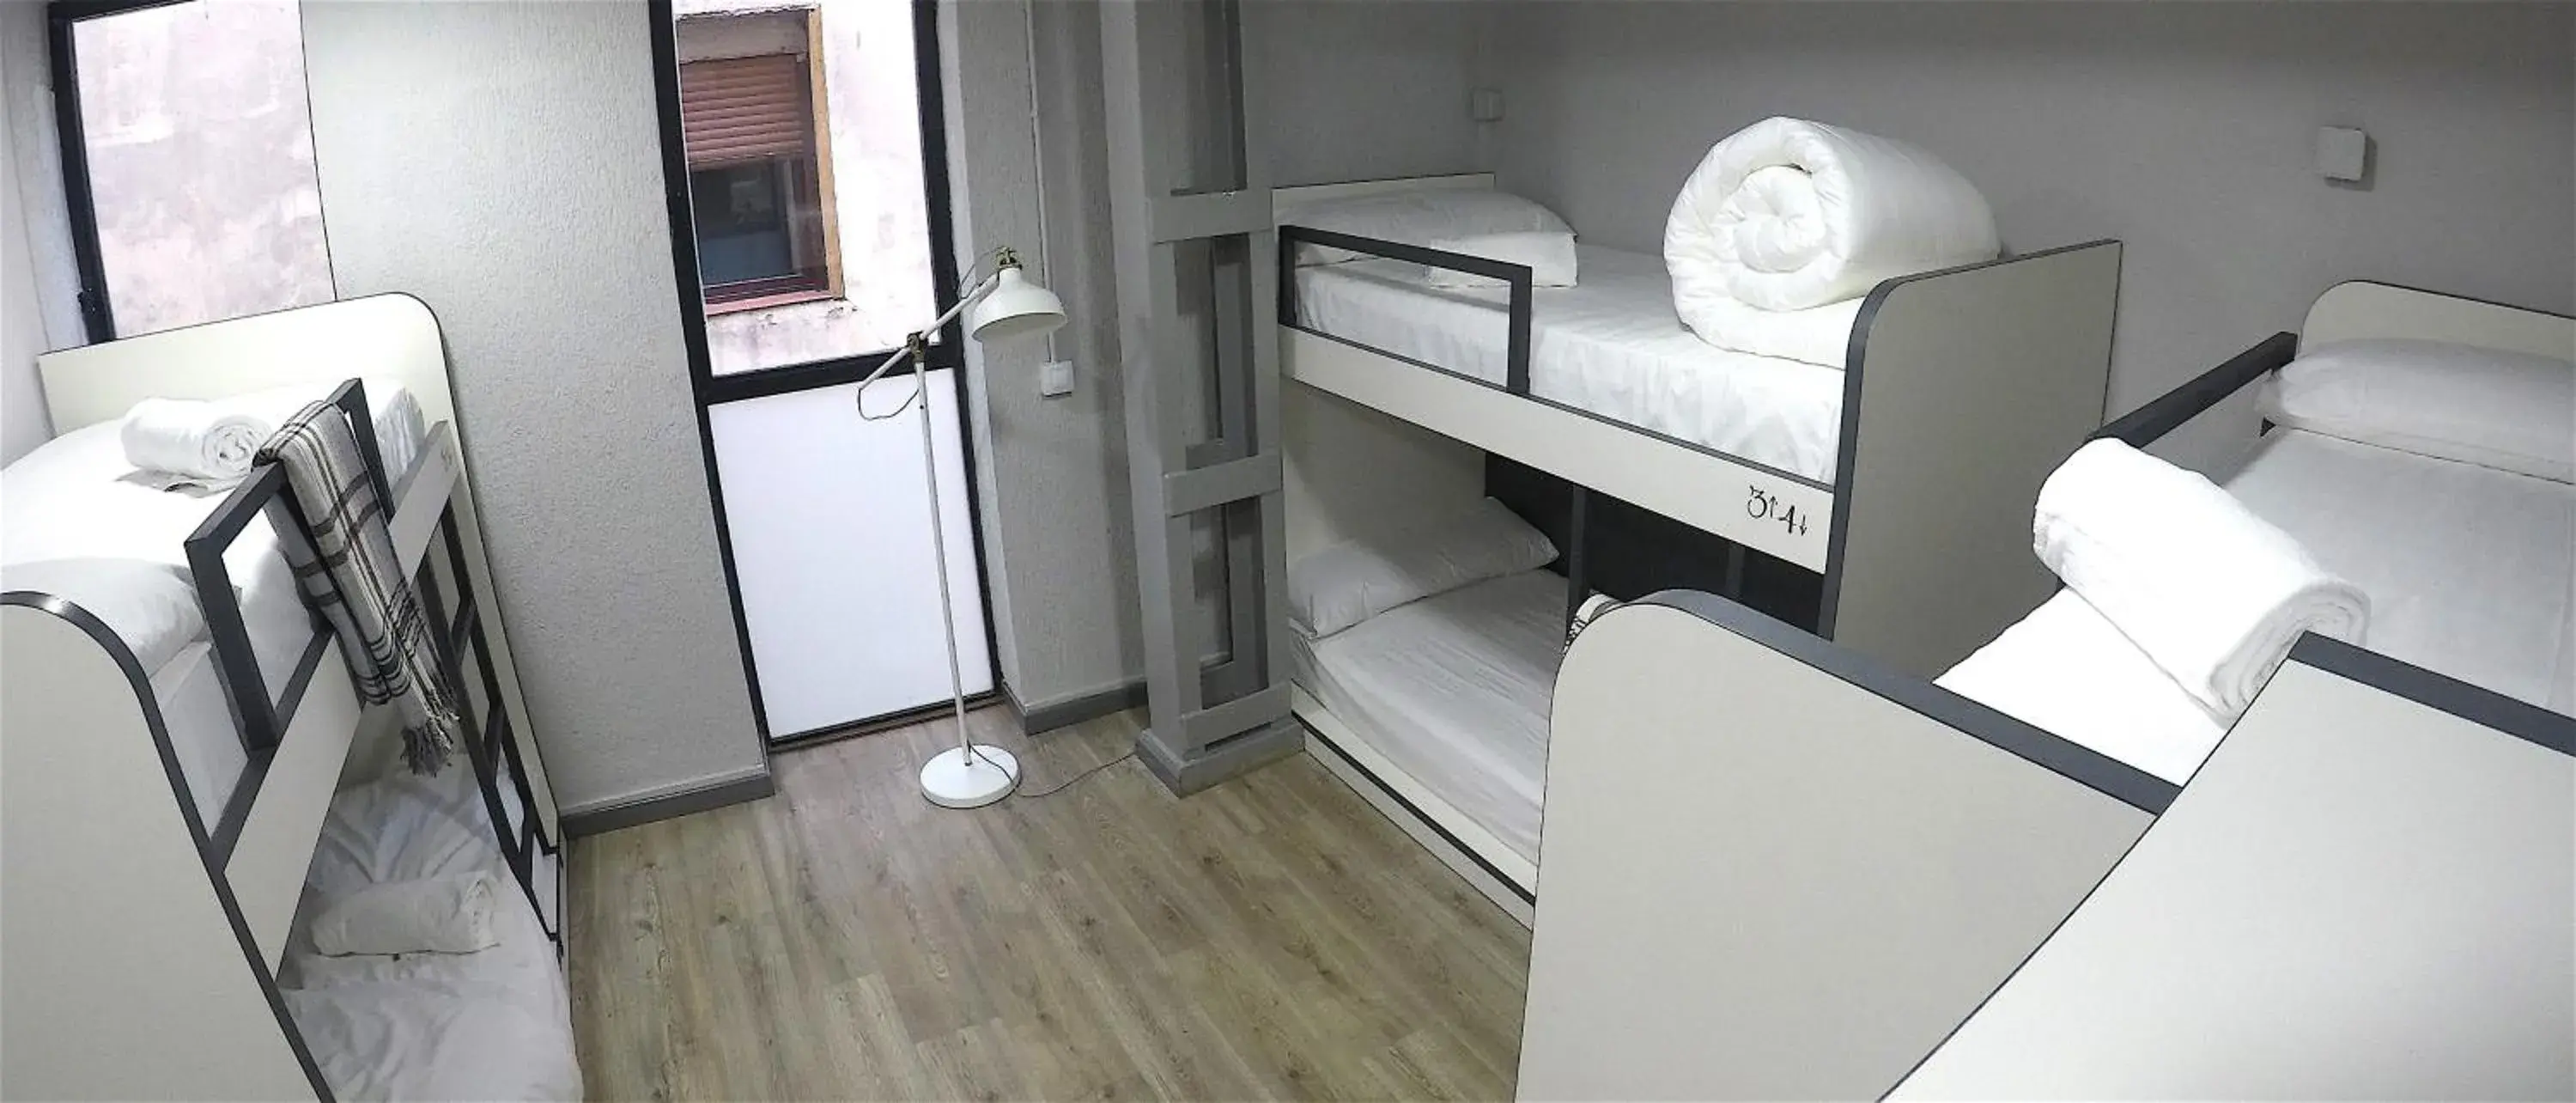 Bed in 6-Bed Mixed Dormitory Room in Quartier Bilbao Hostel